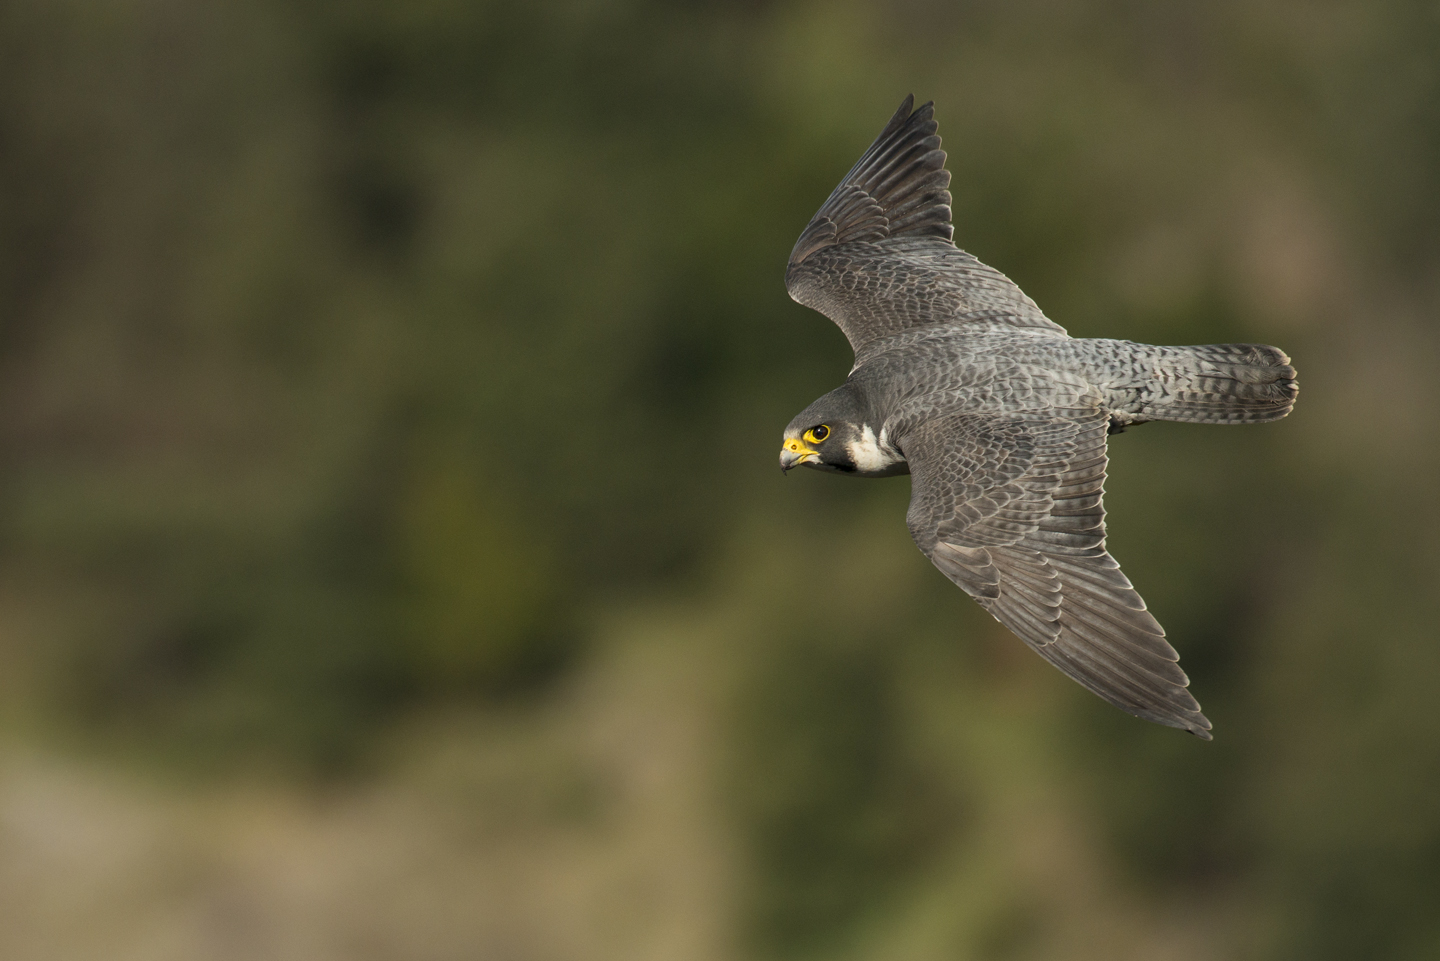  Recovering from under 400 pairs in the 1960s to well over 1500 today, peregrines have made a come-back and are giving us better and closer views than ever before 